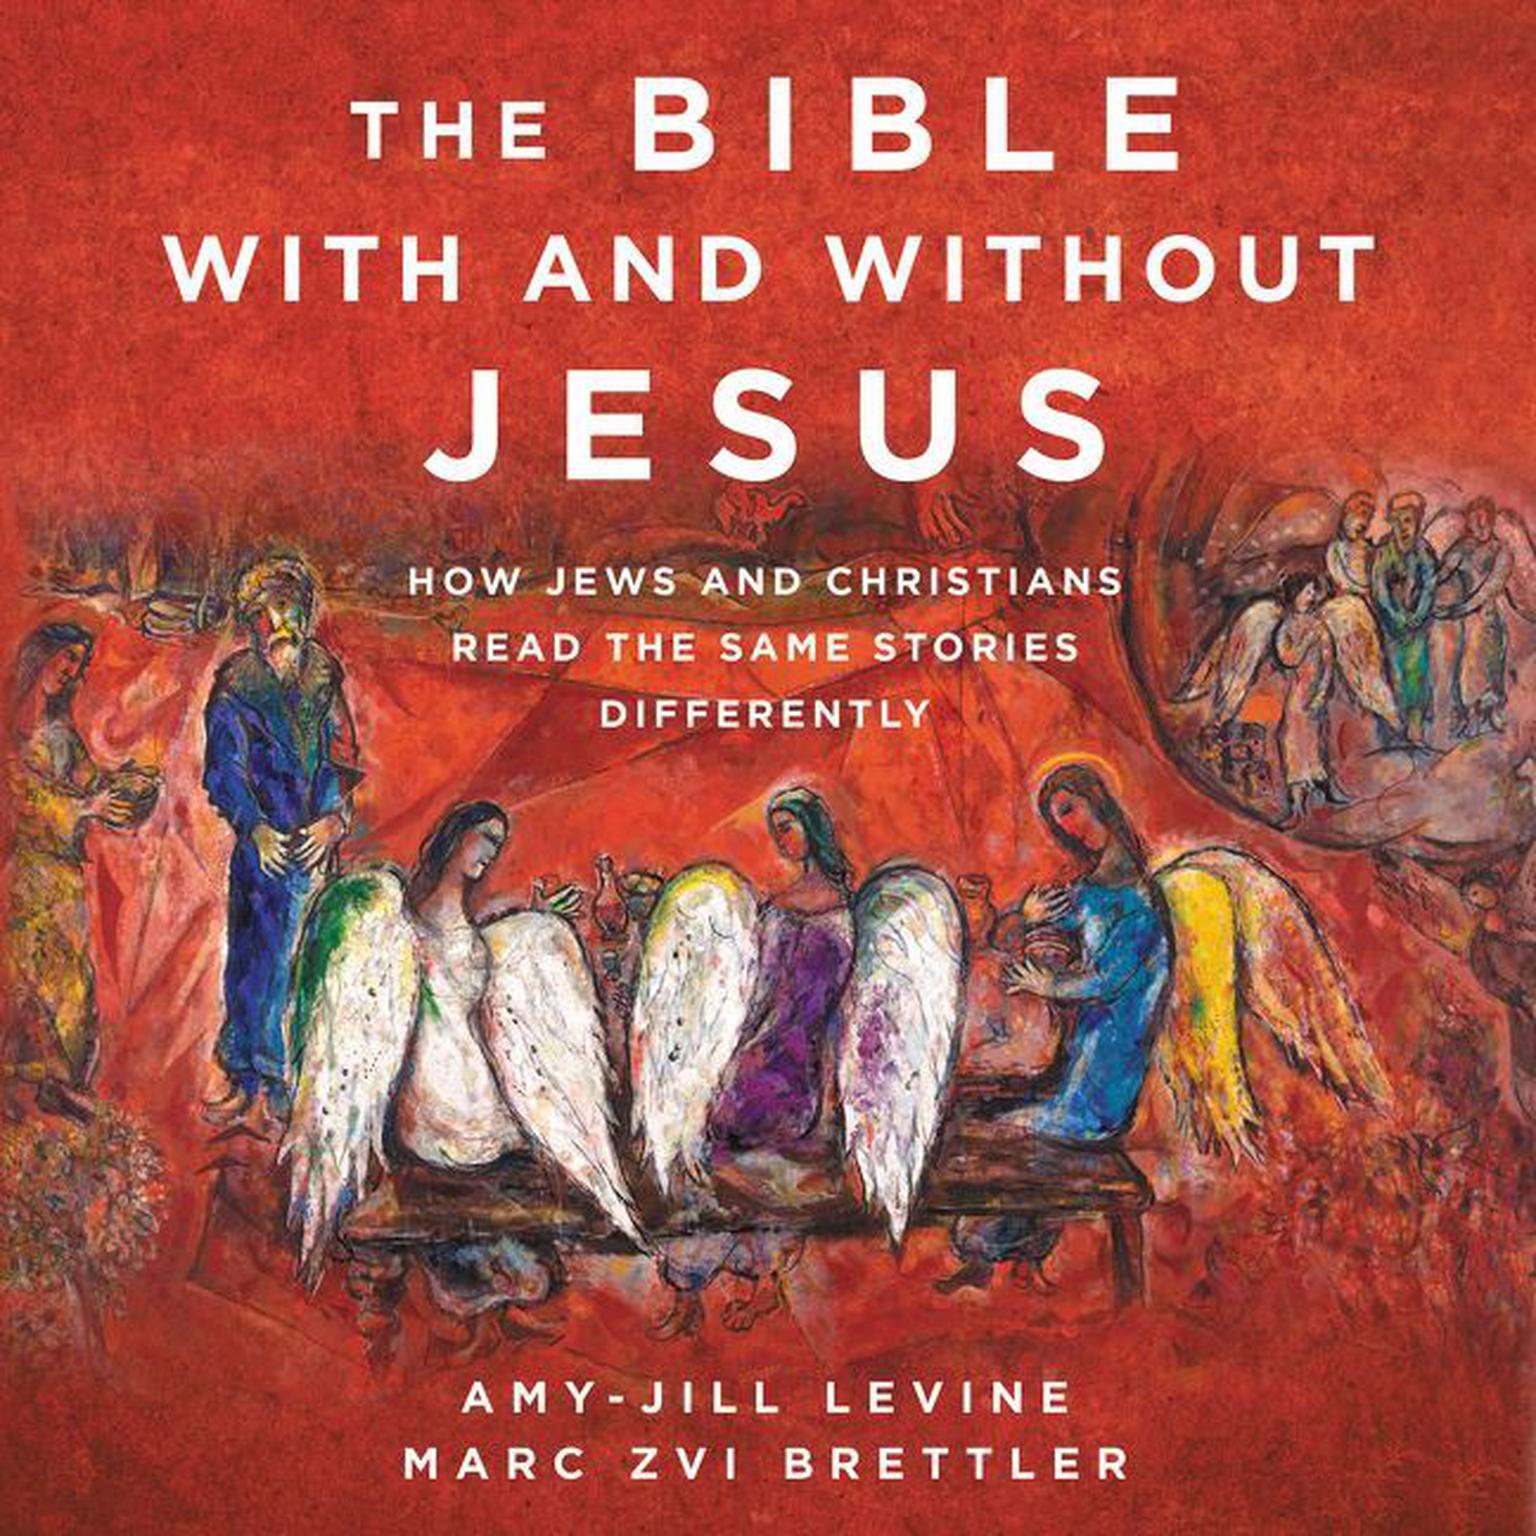 The Bible With and Without Jesus: How Jews and Christians Read the Same Stories Differently Audiobook, by Amy-Jill Levine